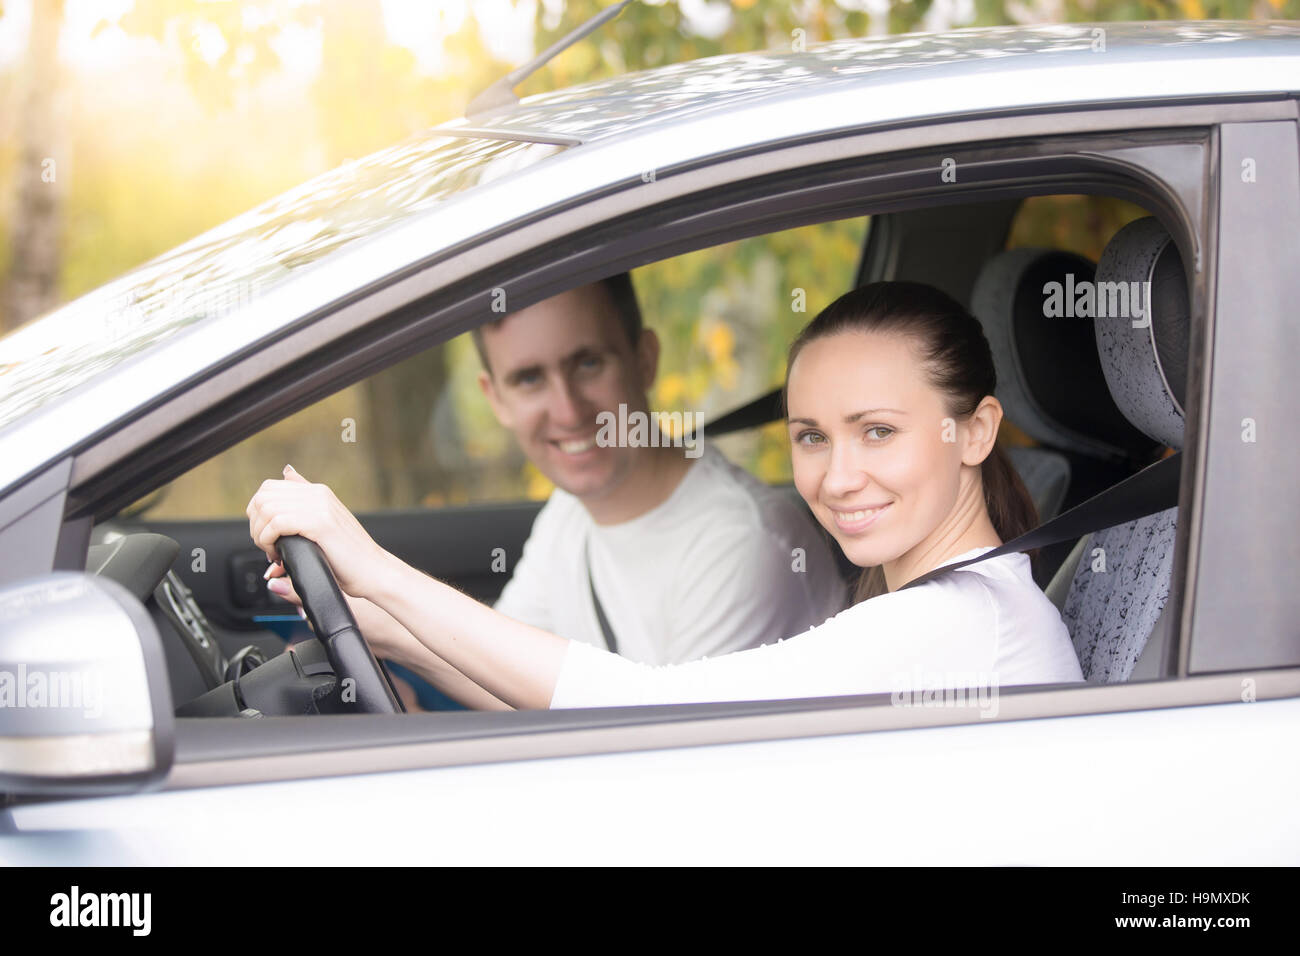 Young woman driving, a man sitting near in the car Stock Photo